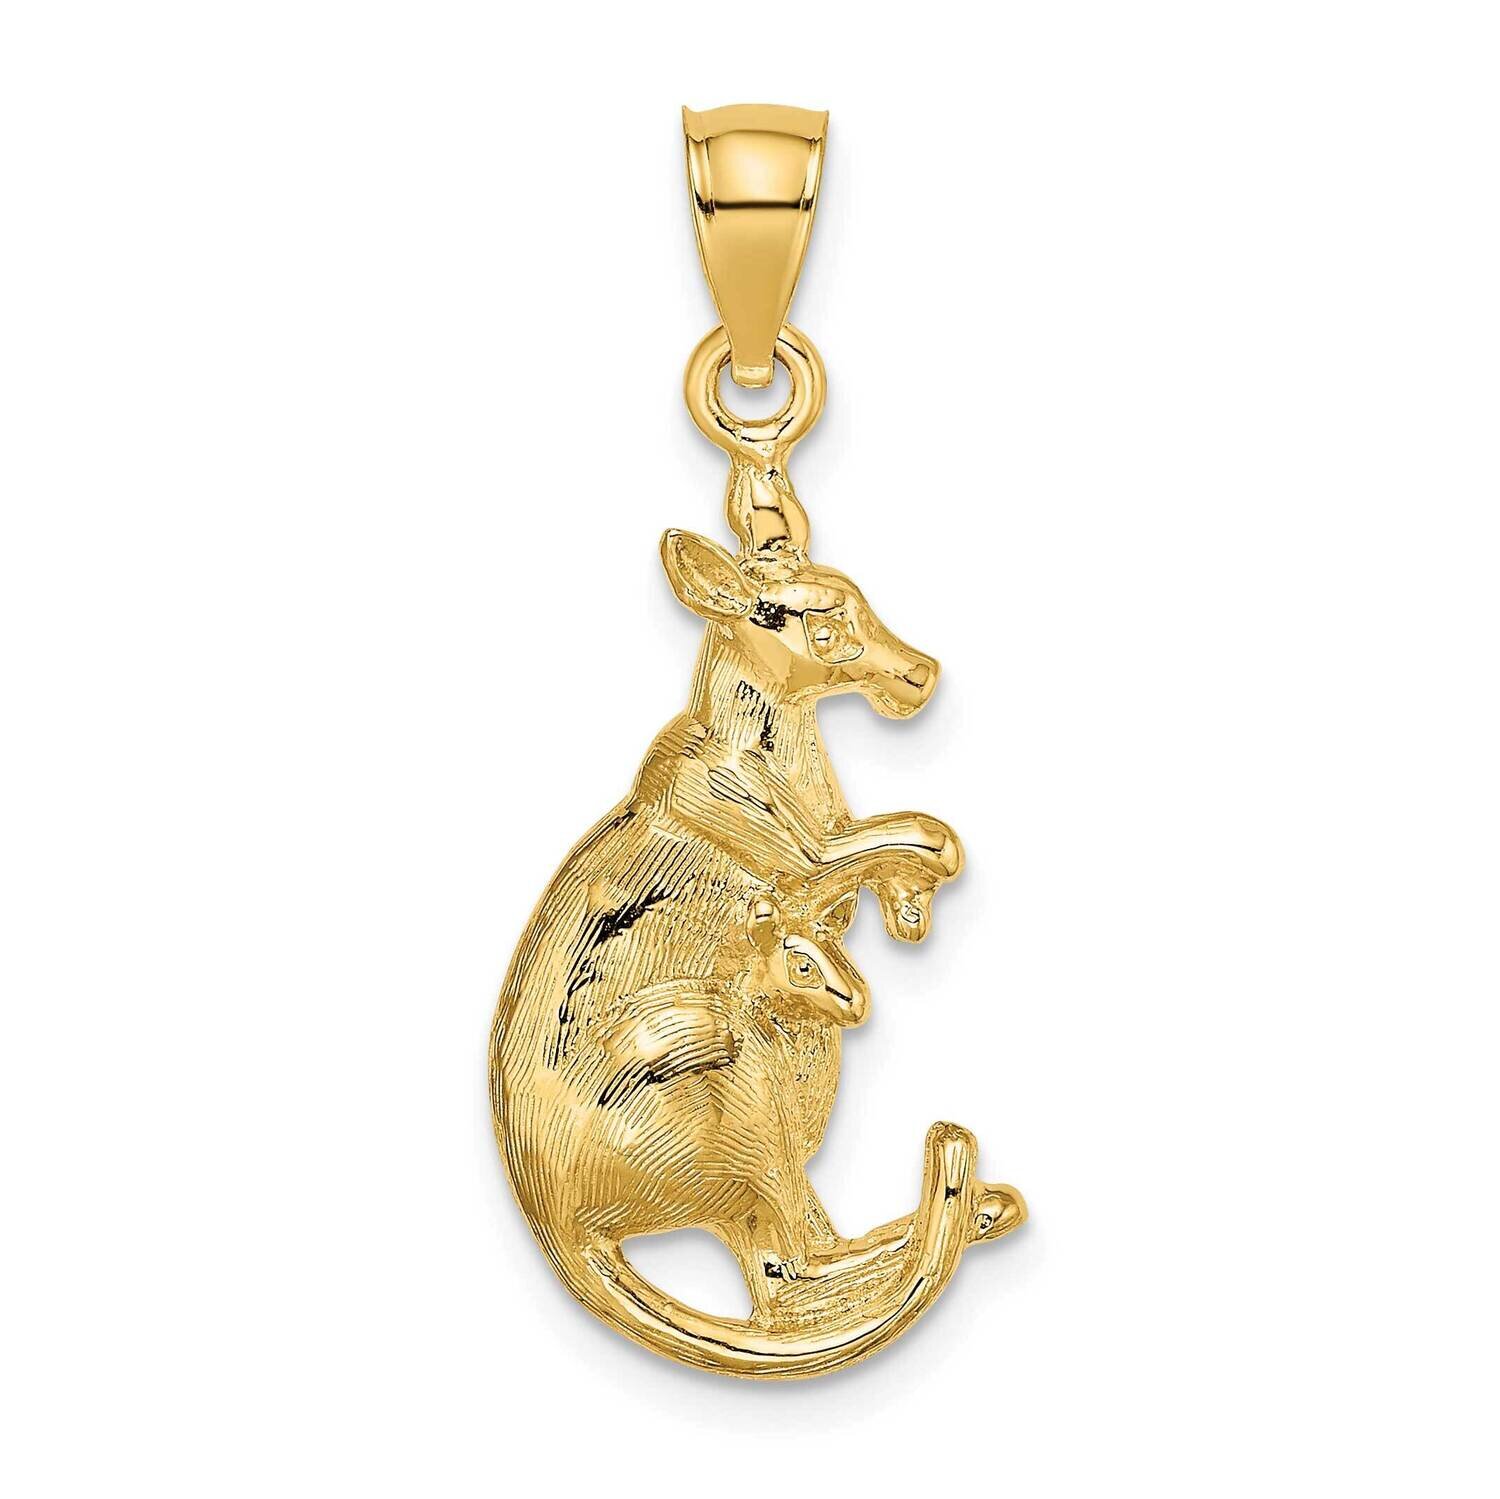 Kangaroo with Baby In Pouch Charm 14k Gold 2-D K6487